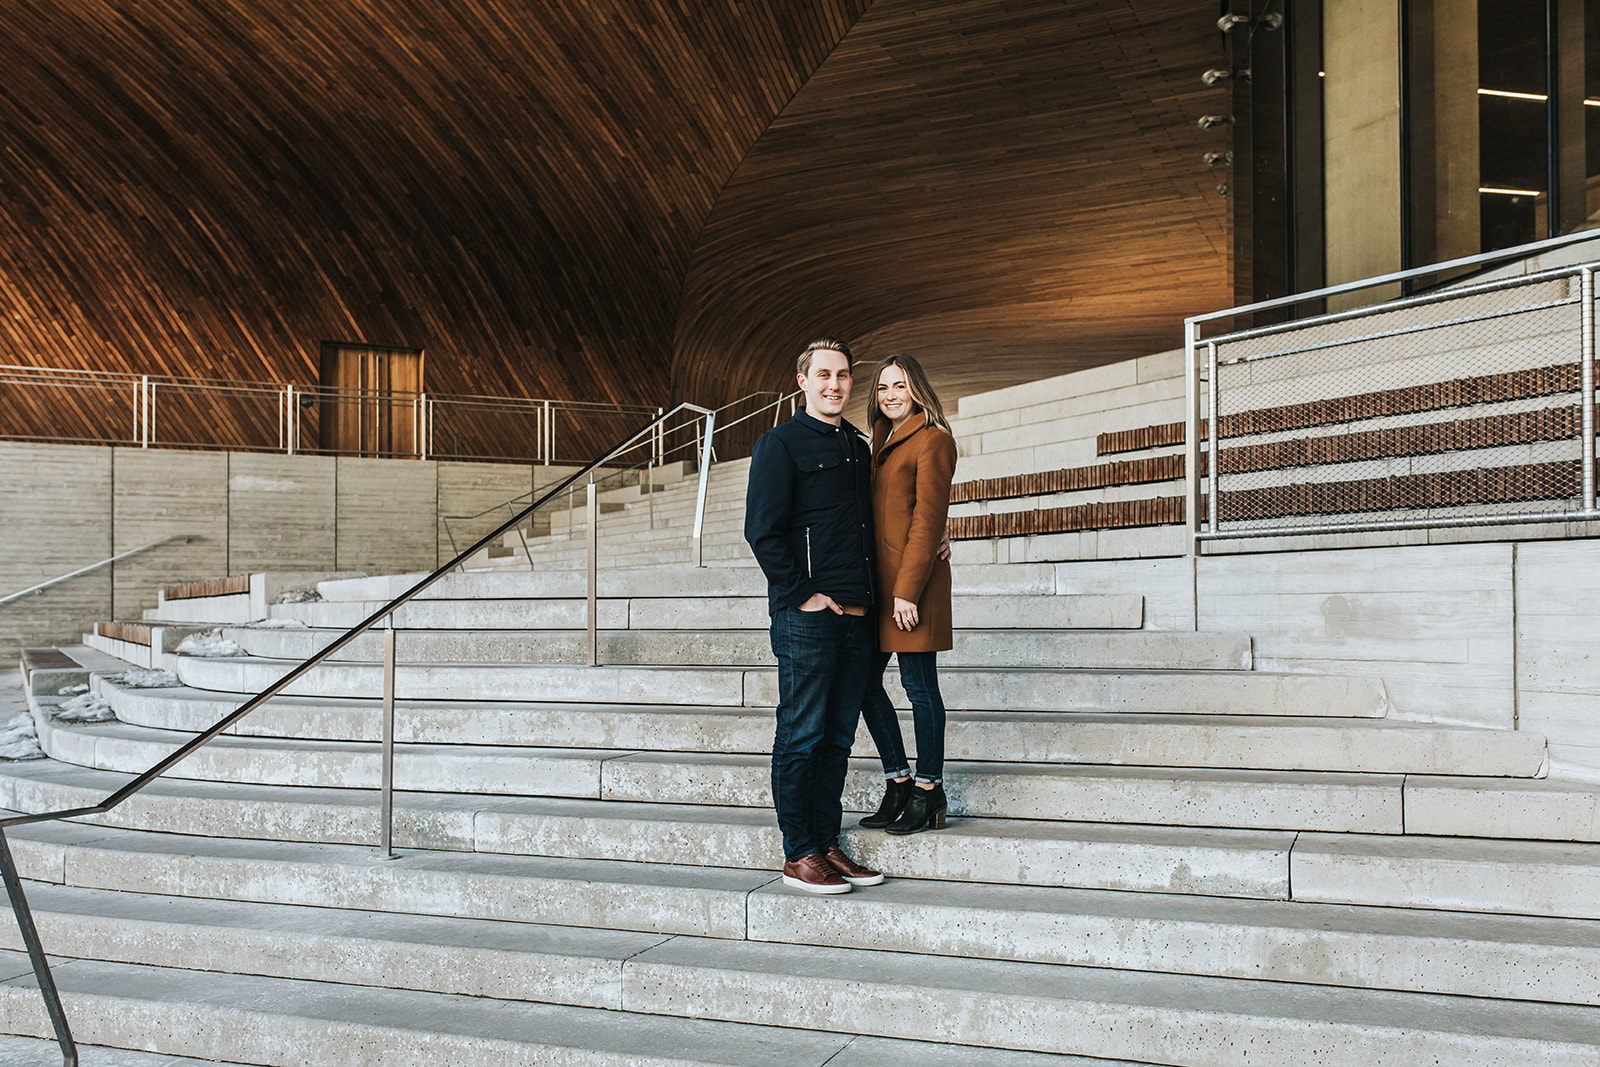 Calgary City Vibes for Michelle + Thomas's Urban Engagement Session